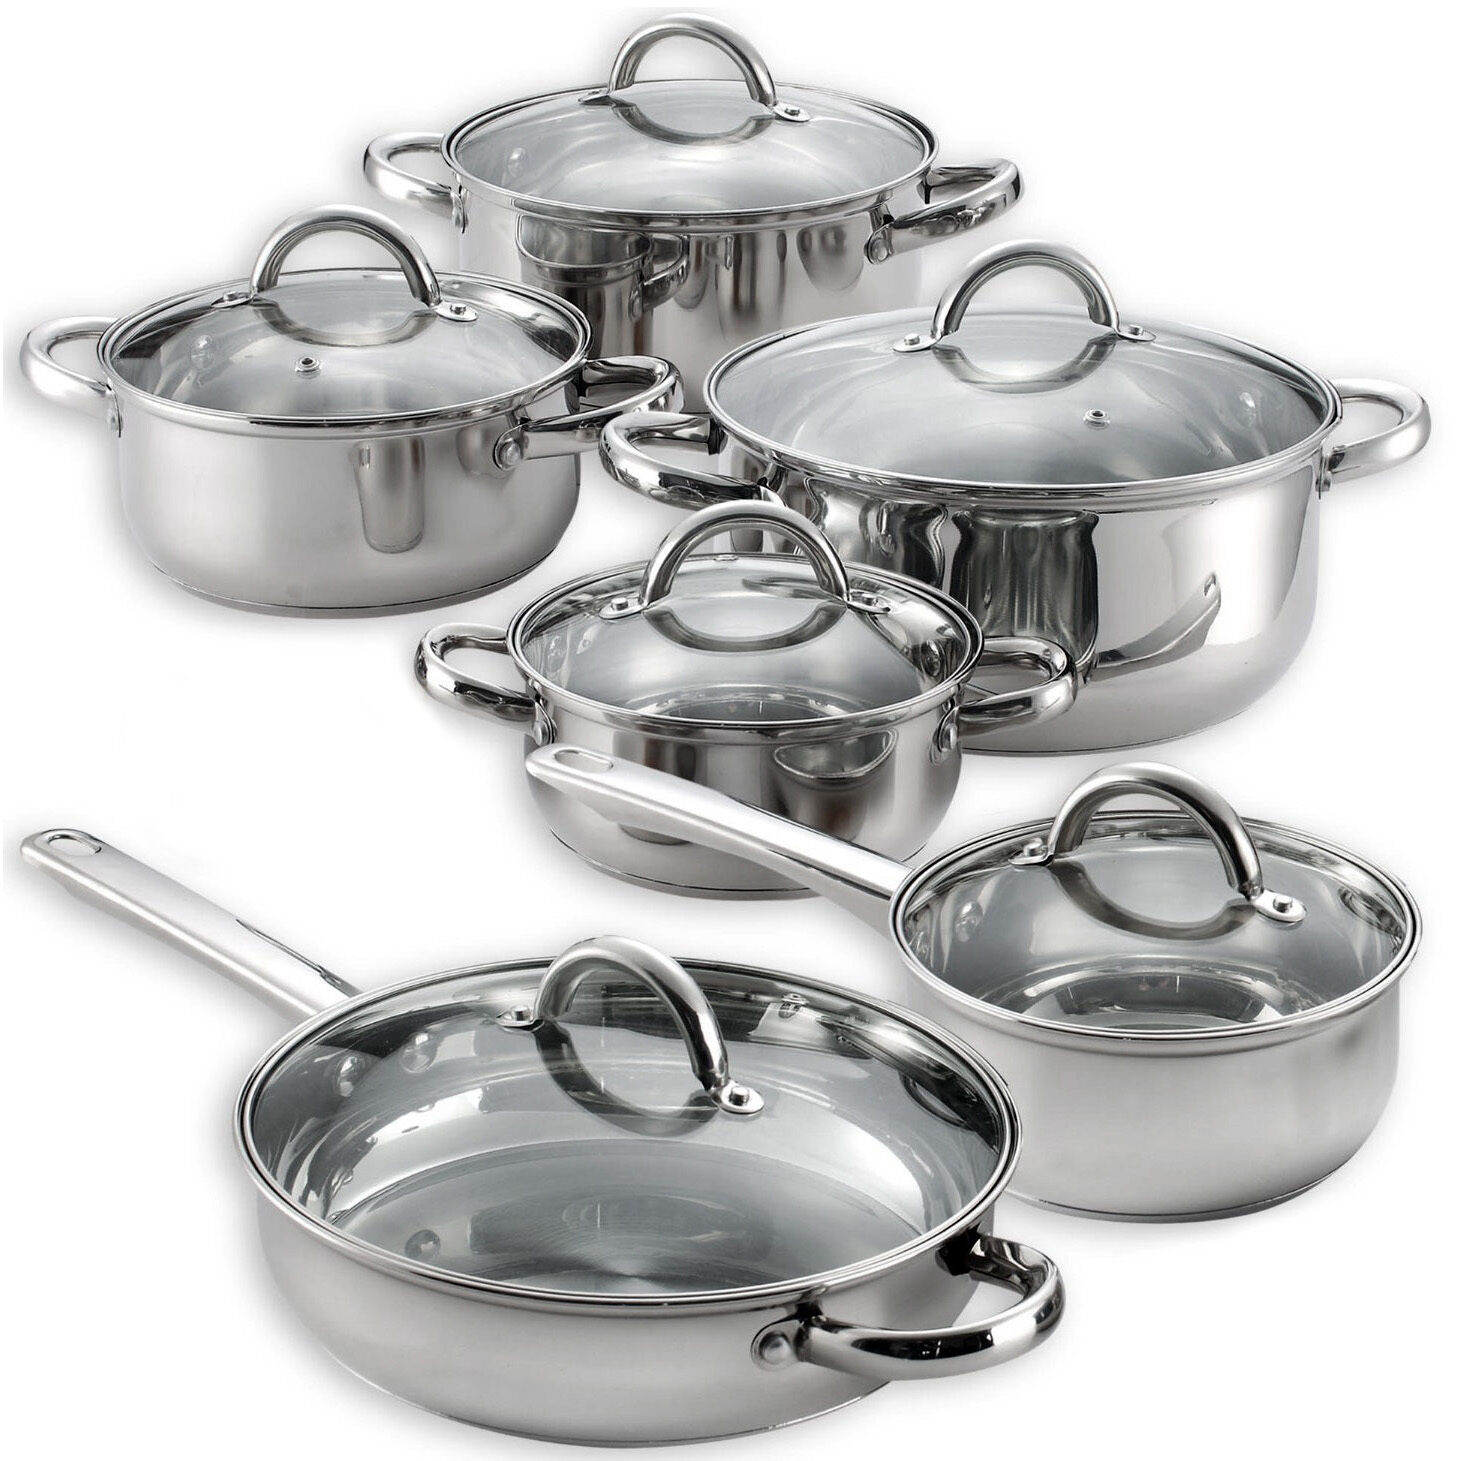 Heim's 12 Pieces Cooking Pots and Pans Kitchen Stainless Steel Cookware Set Lids